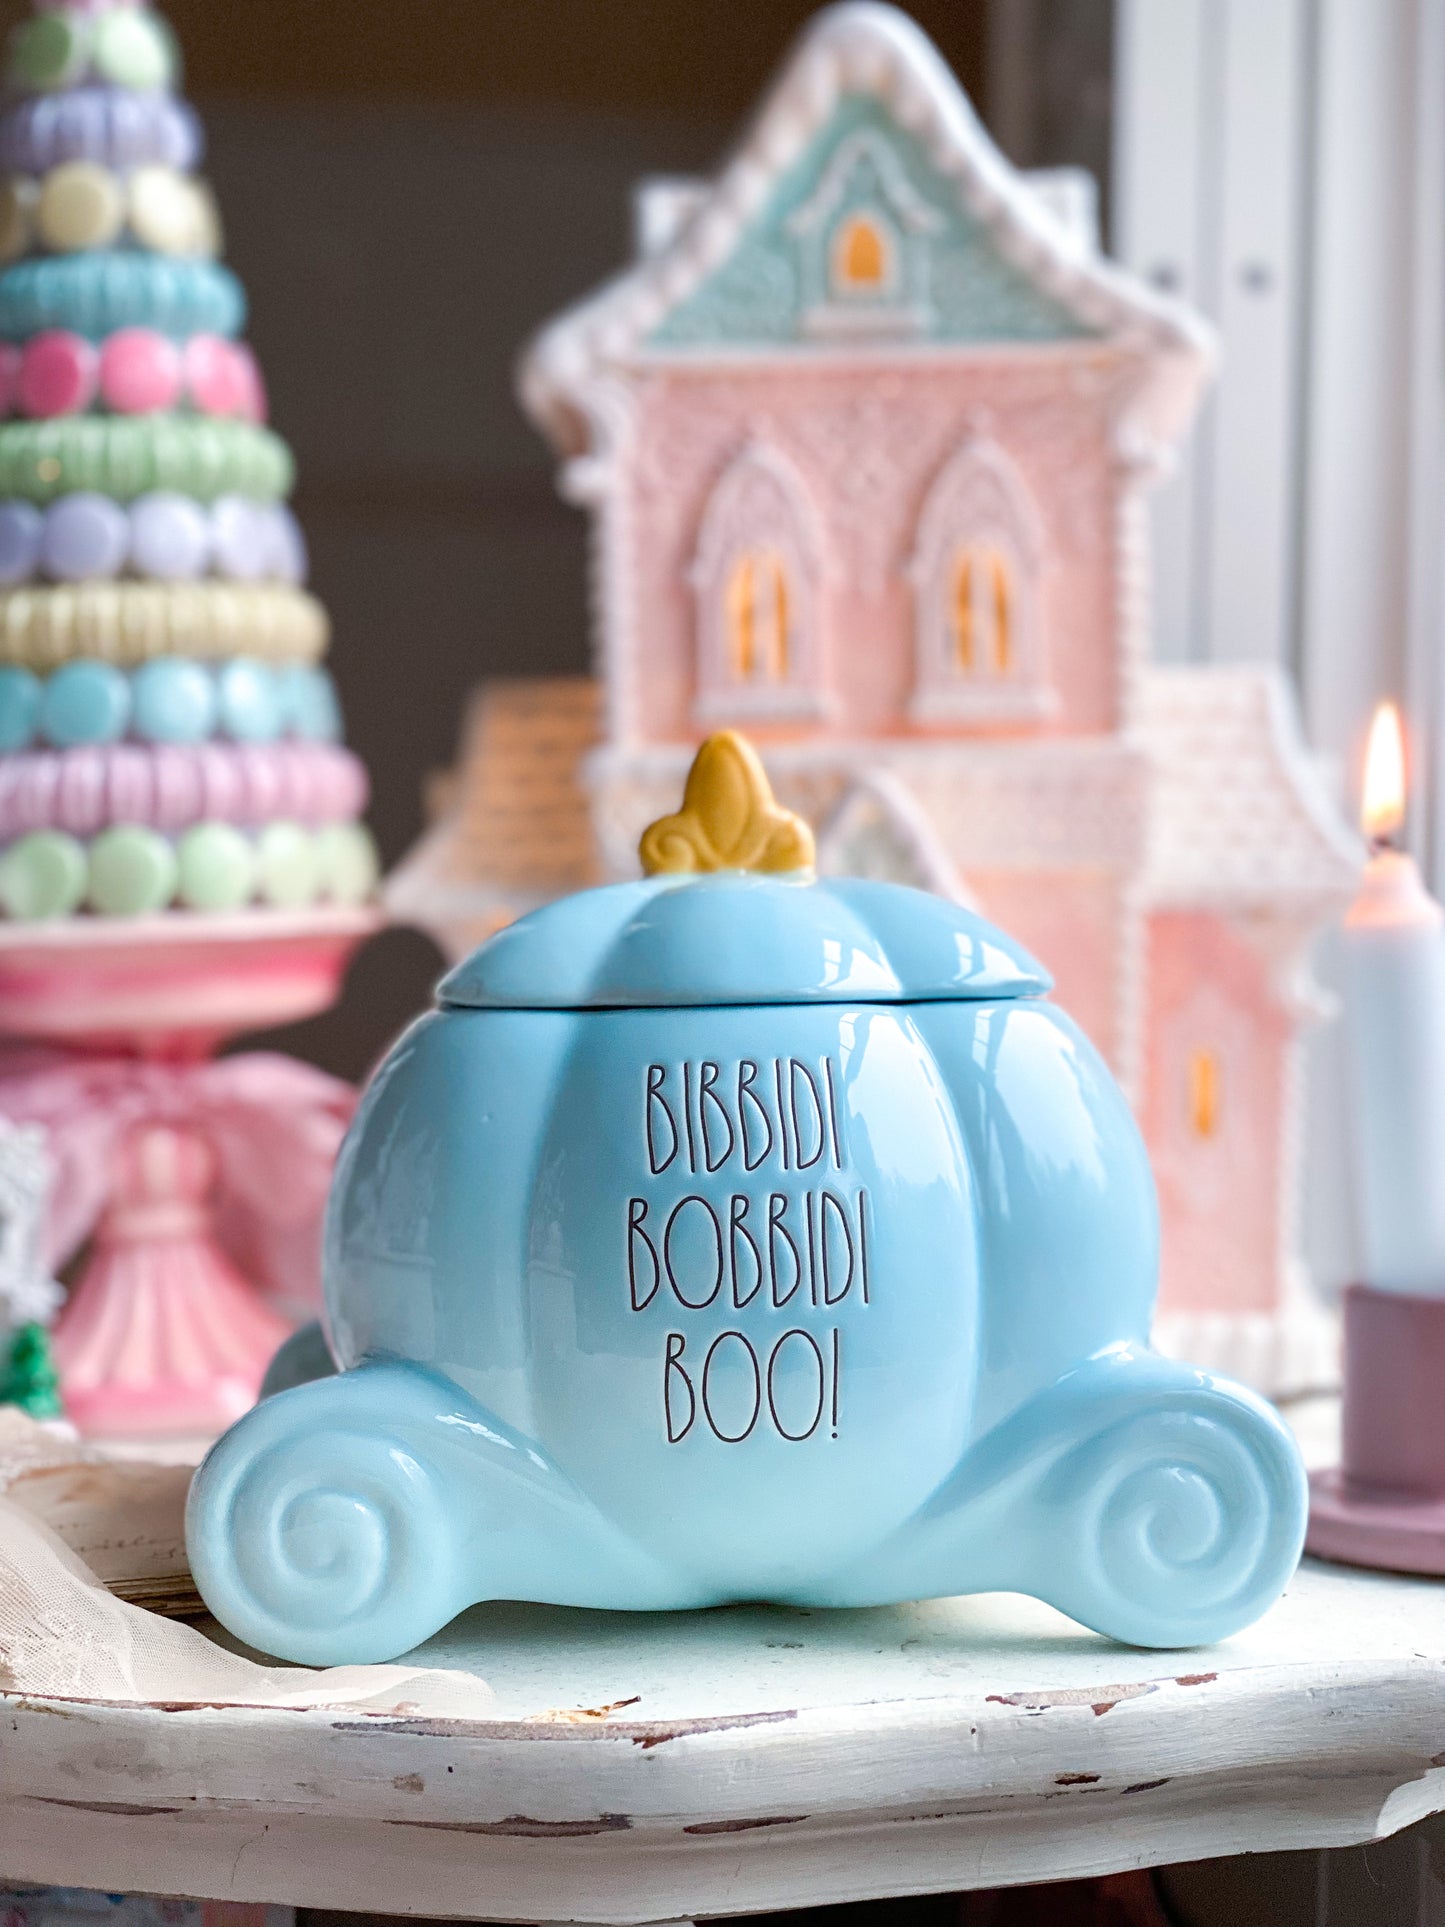 Baby Blue Cinderella Carriage Cookie Jar from Rae Dunn